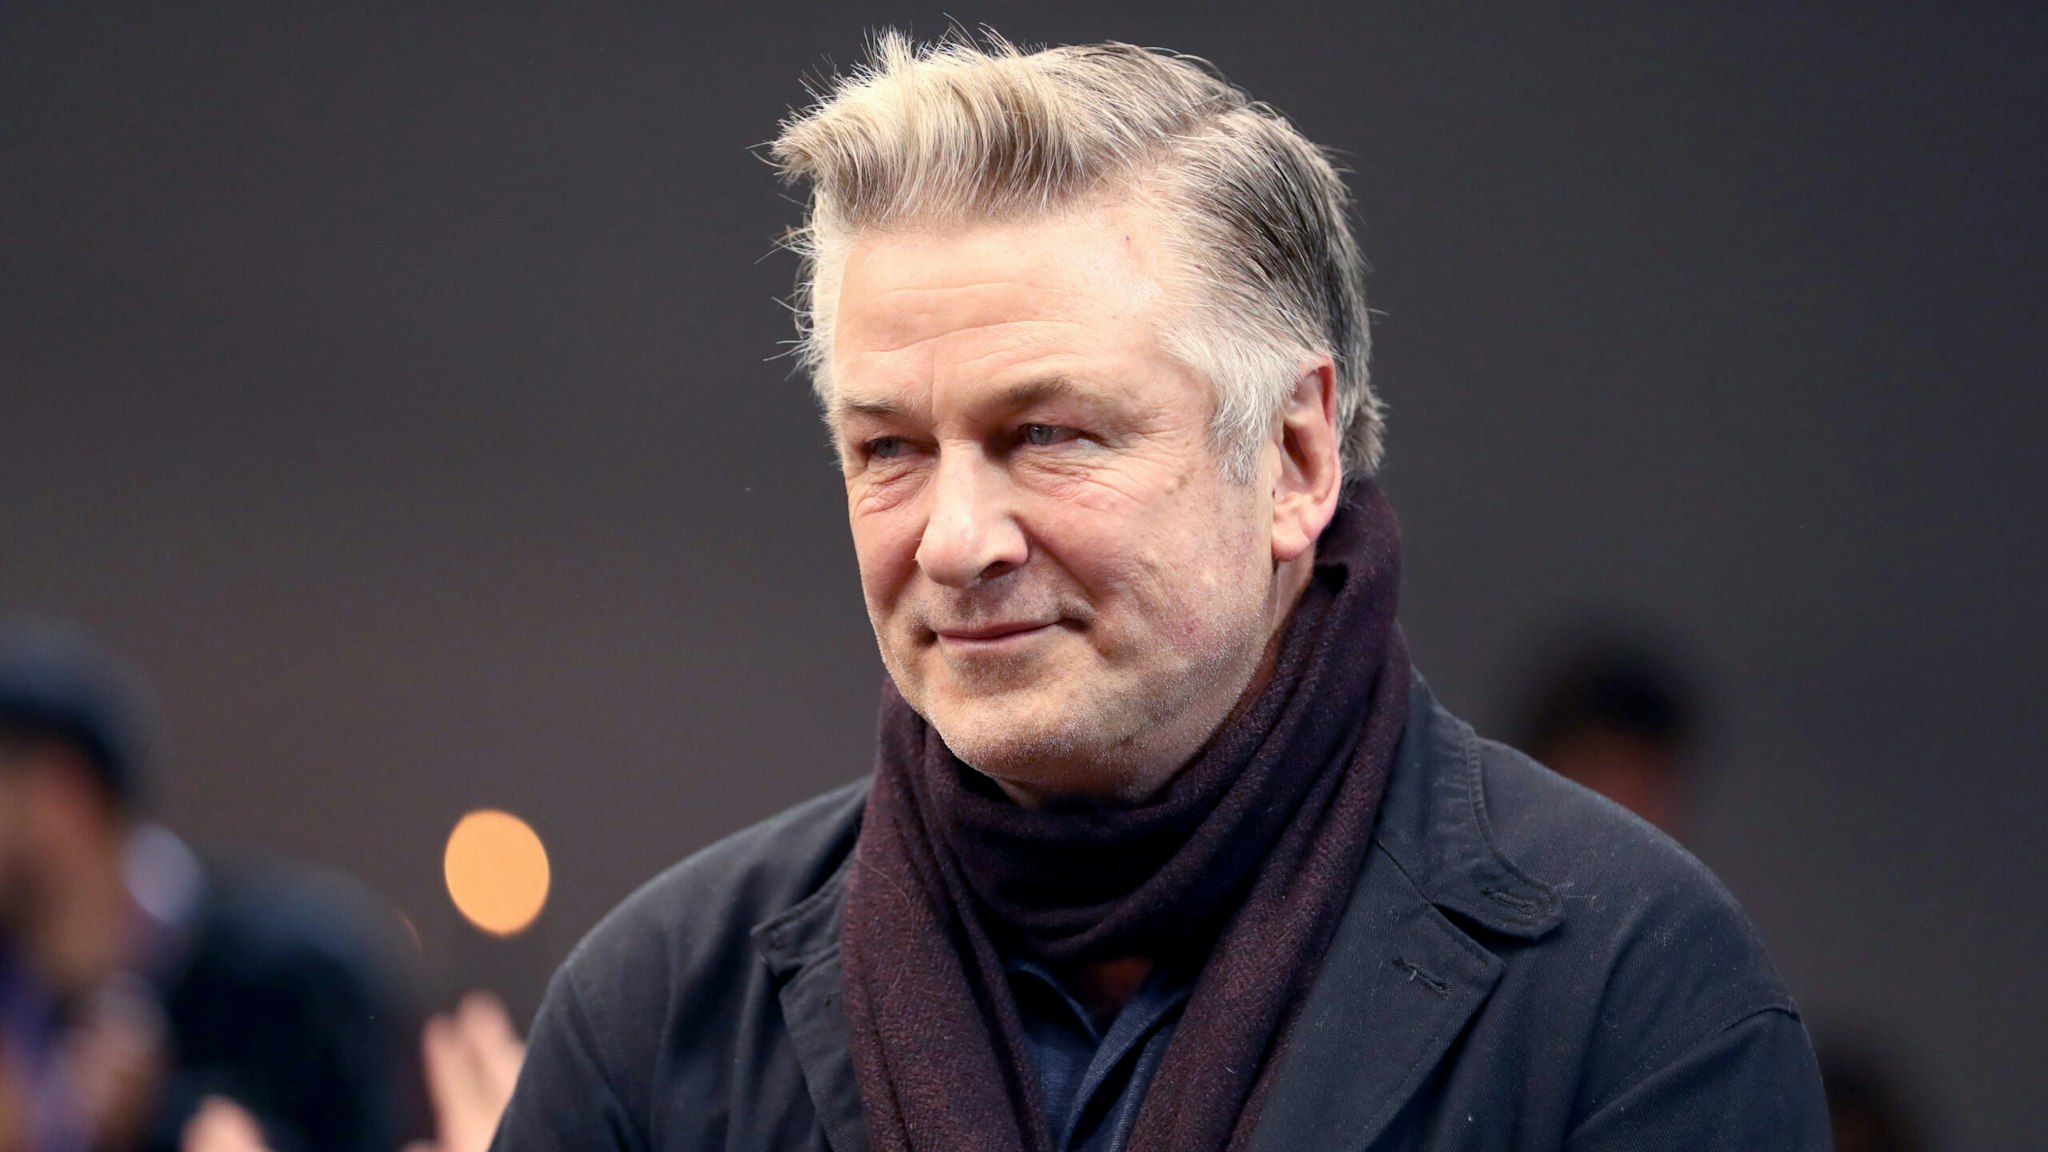 PARK CITY, UTAH - JANUARY 23: Alec Baldwin attends Sundance Institute's 'An Artist at the Table Presented by IMDbPro' at the 2020 Sundance Film Festival on January 23, 2020 in Park City, Utah.